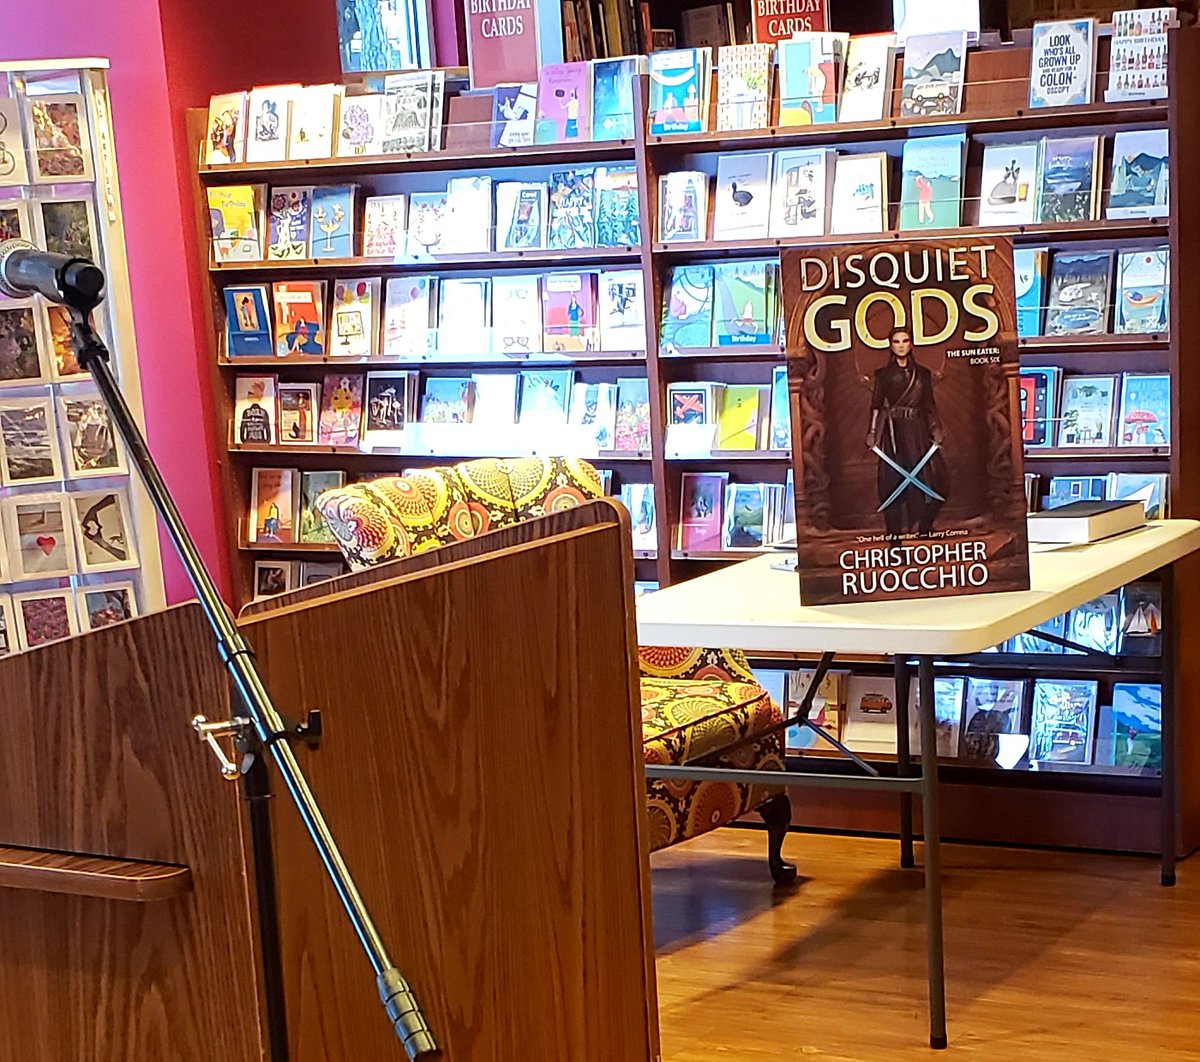 30 minutes and counting until Christopher Ruocchio's signing at @quailridgebooks in Raleigh! Time for some 'DISQUIET GODS' and #suneater @BaenBooks